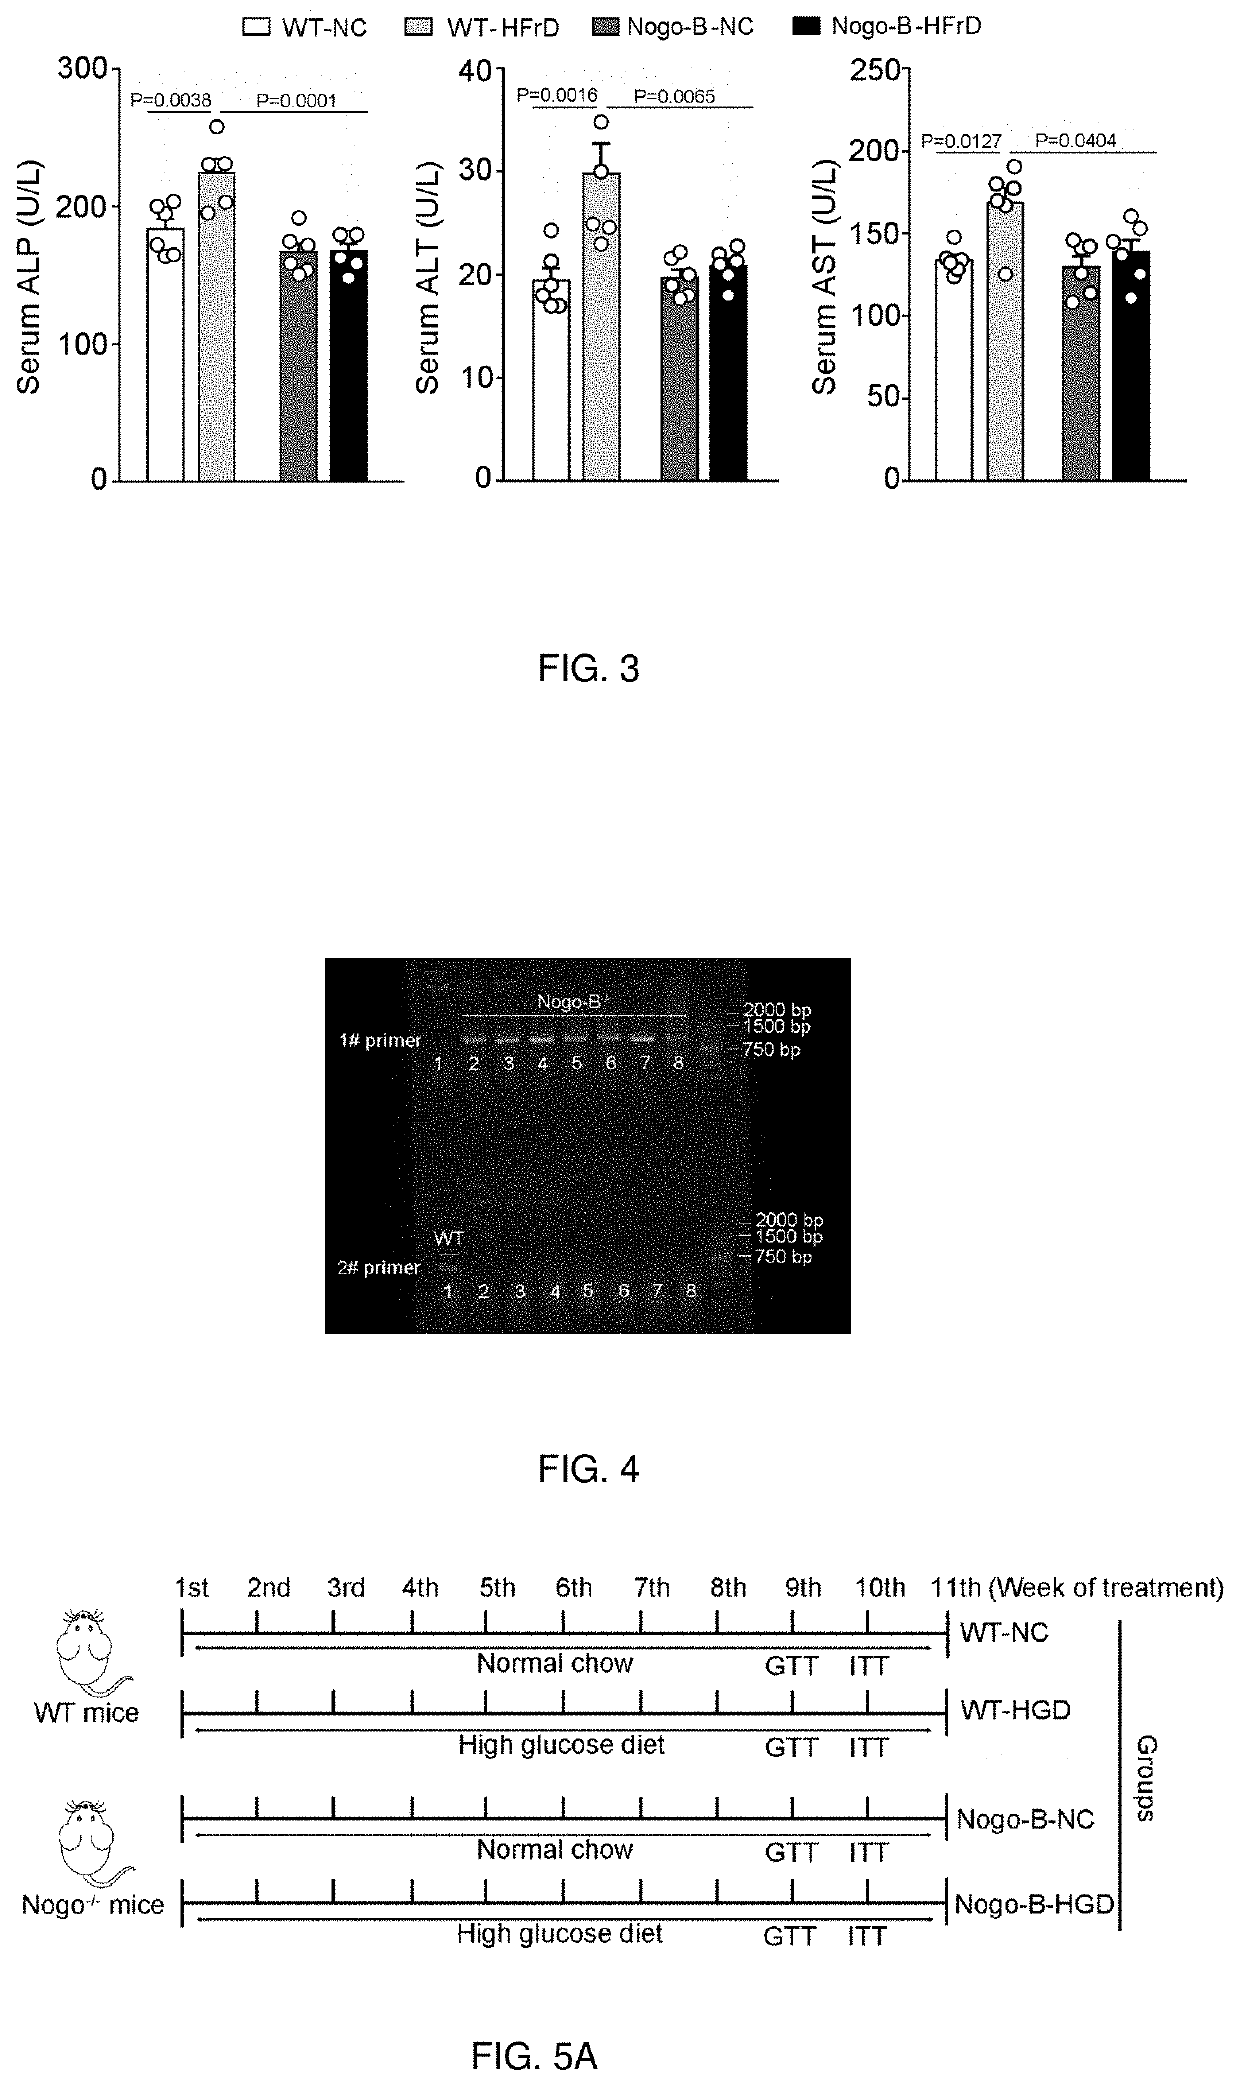 Medicine for treating disorders of glucose and/or lipid metabolism and a method of treating glucose and/or lipid metabolic disorders